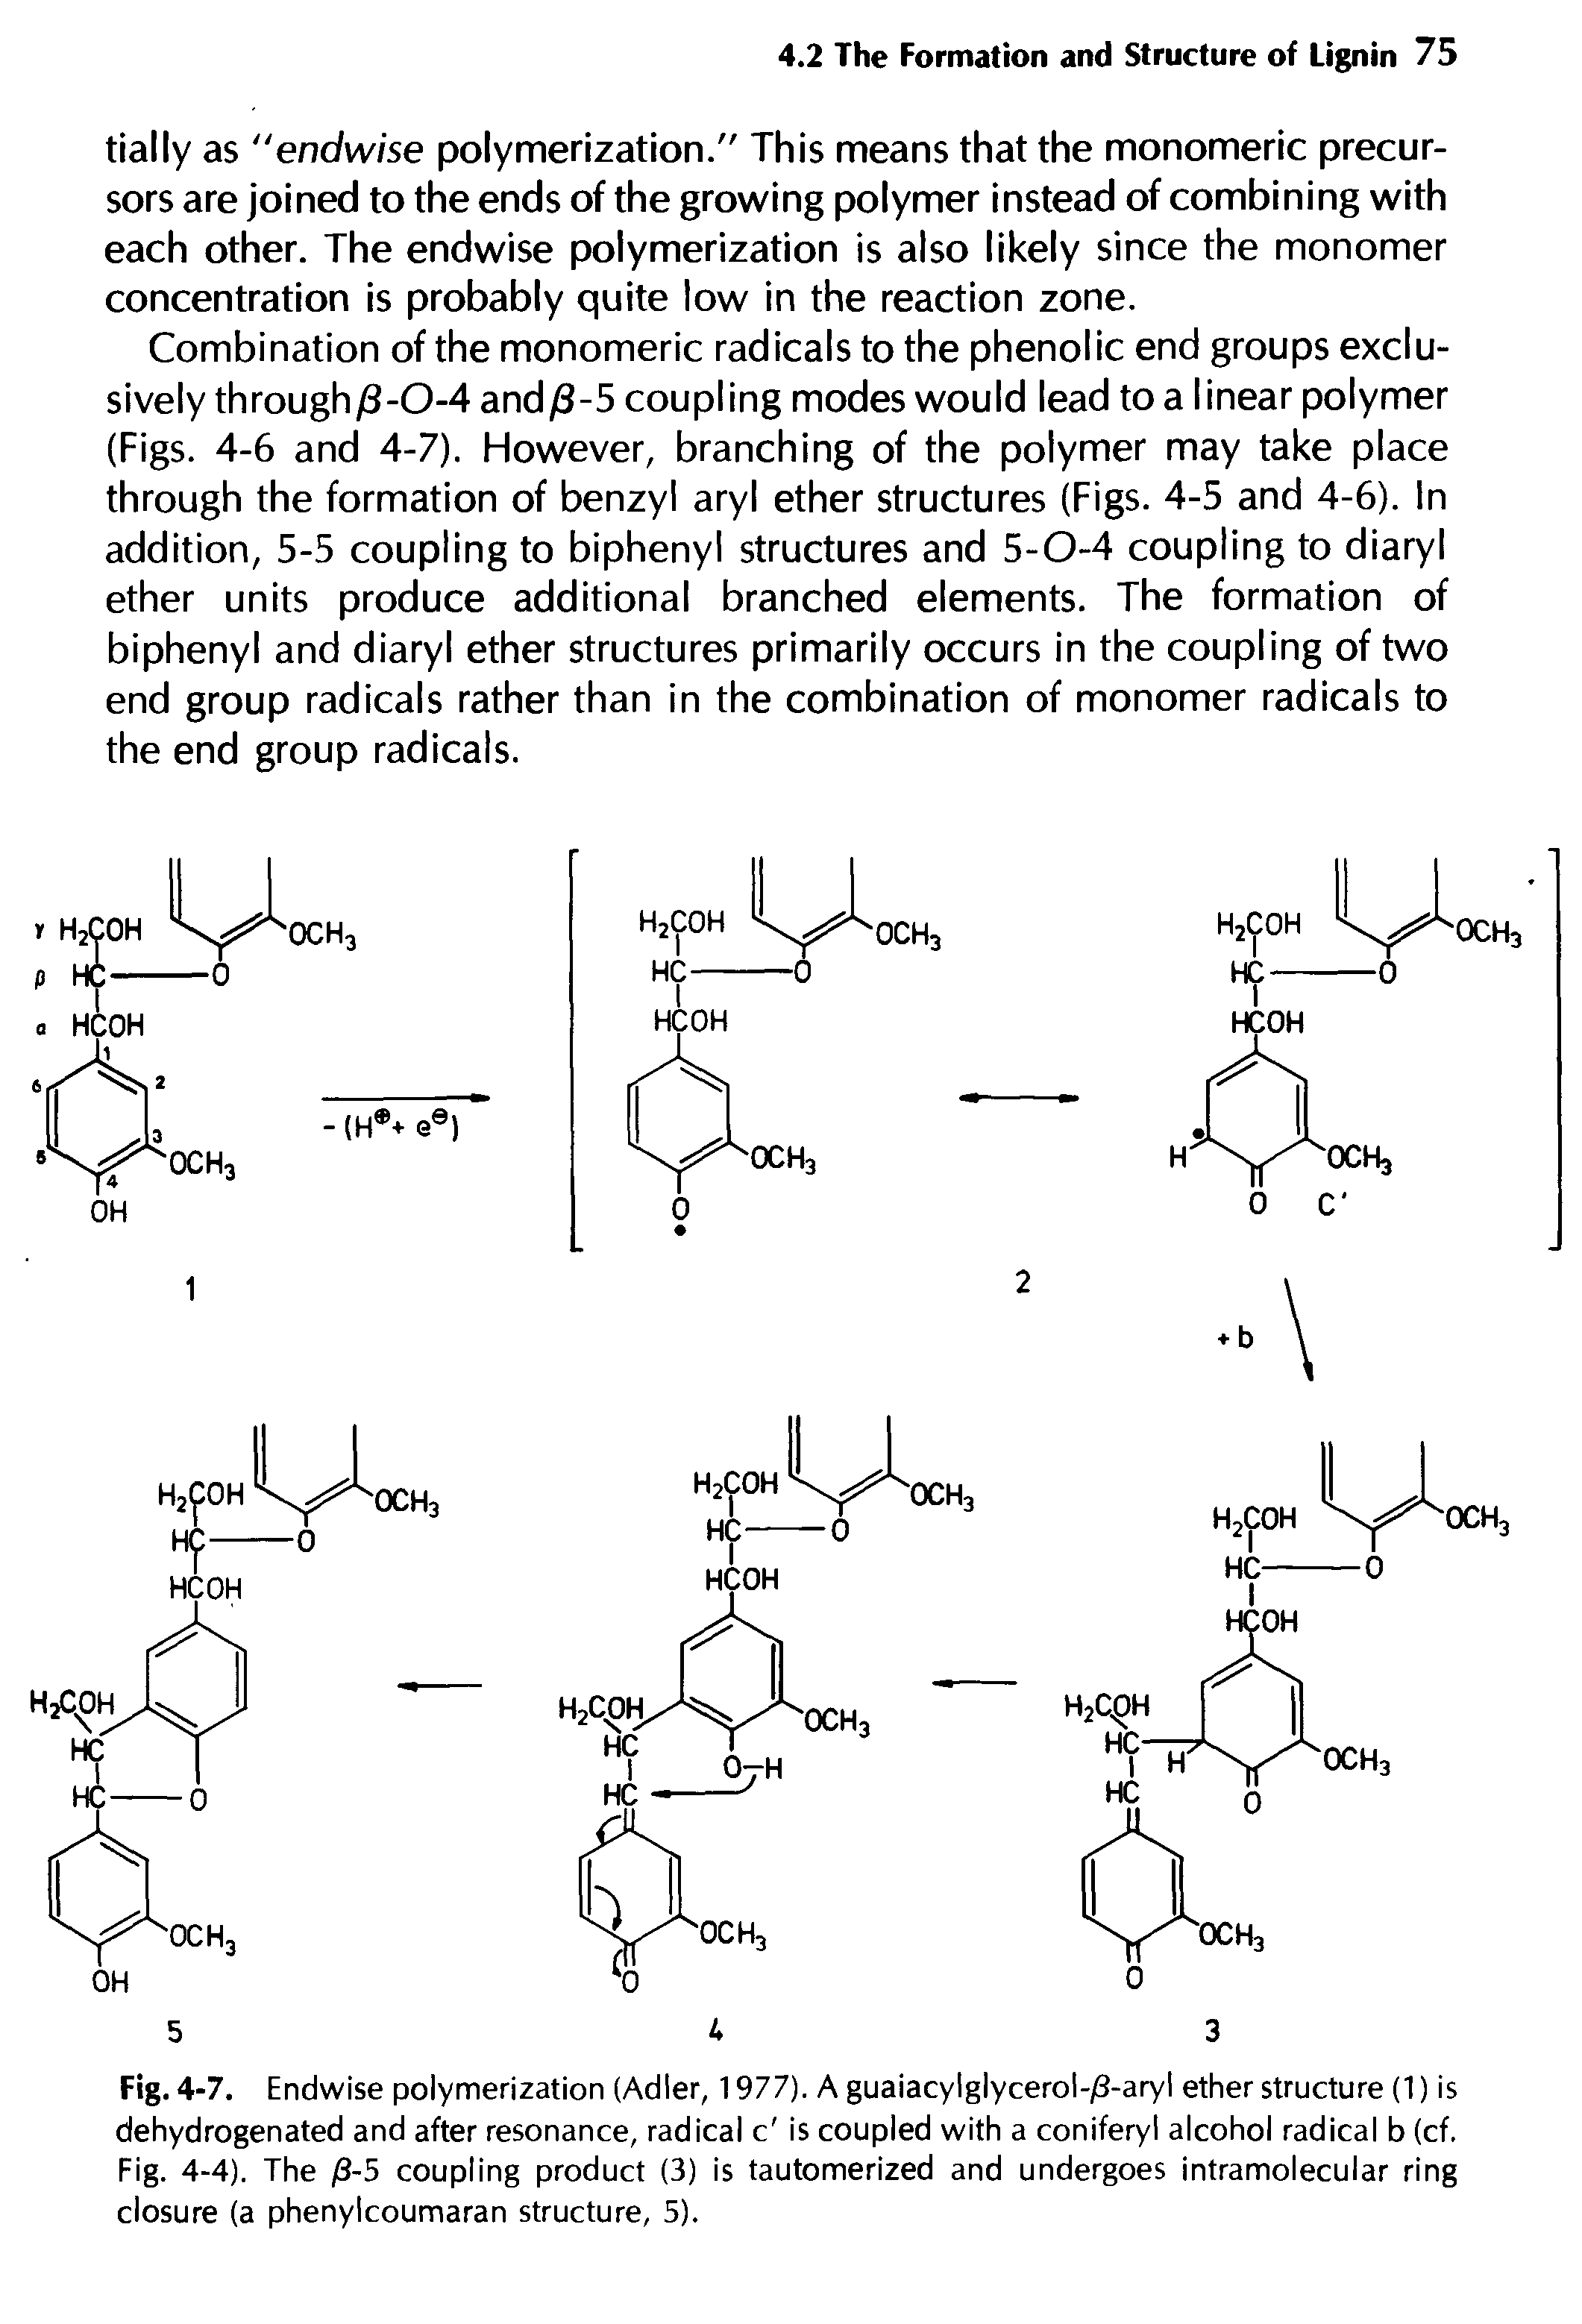 Fig. 4-7. Endwise polymerization (Adler, 1977). A guaiacylglycerol-/3-aryl ether structure (1) is dehydrogenated and after resonance, radical c is coupled with a coniferyl alcohol radical b (cf. Fig. 4-4). The /3-5 coupling product (3) is tautomerized and undergoes intramolecular ring closure (a phenylcoumaran structure, 5).